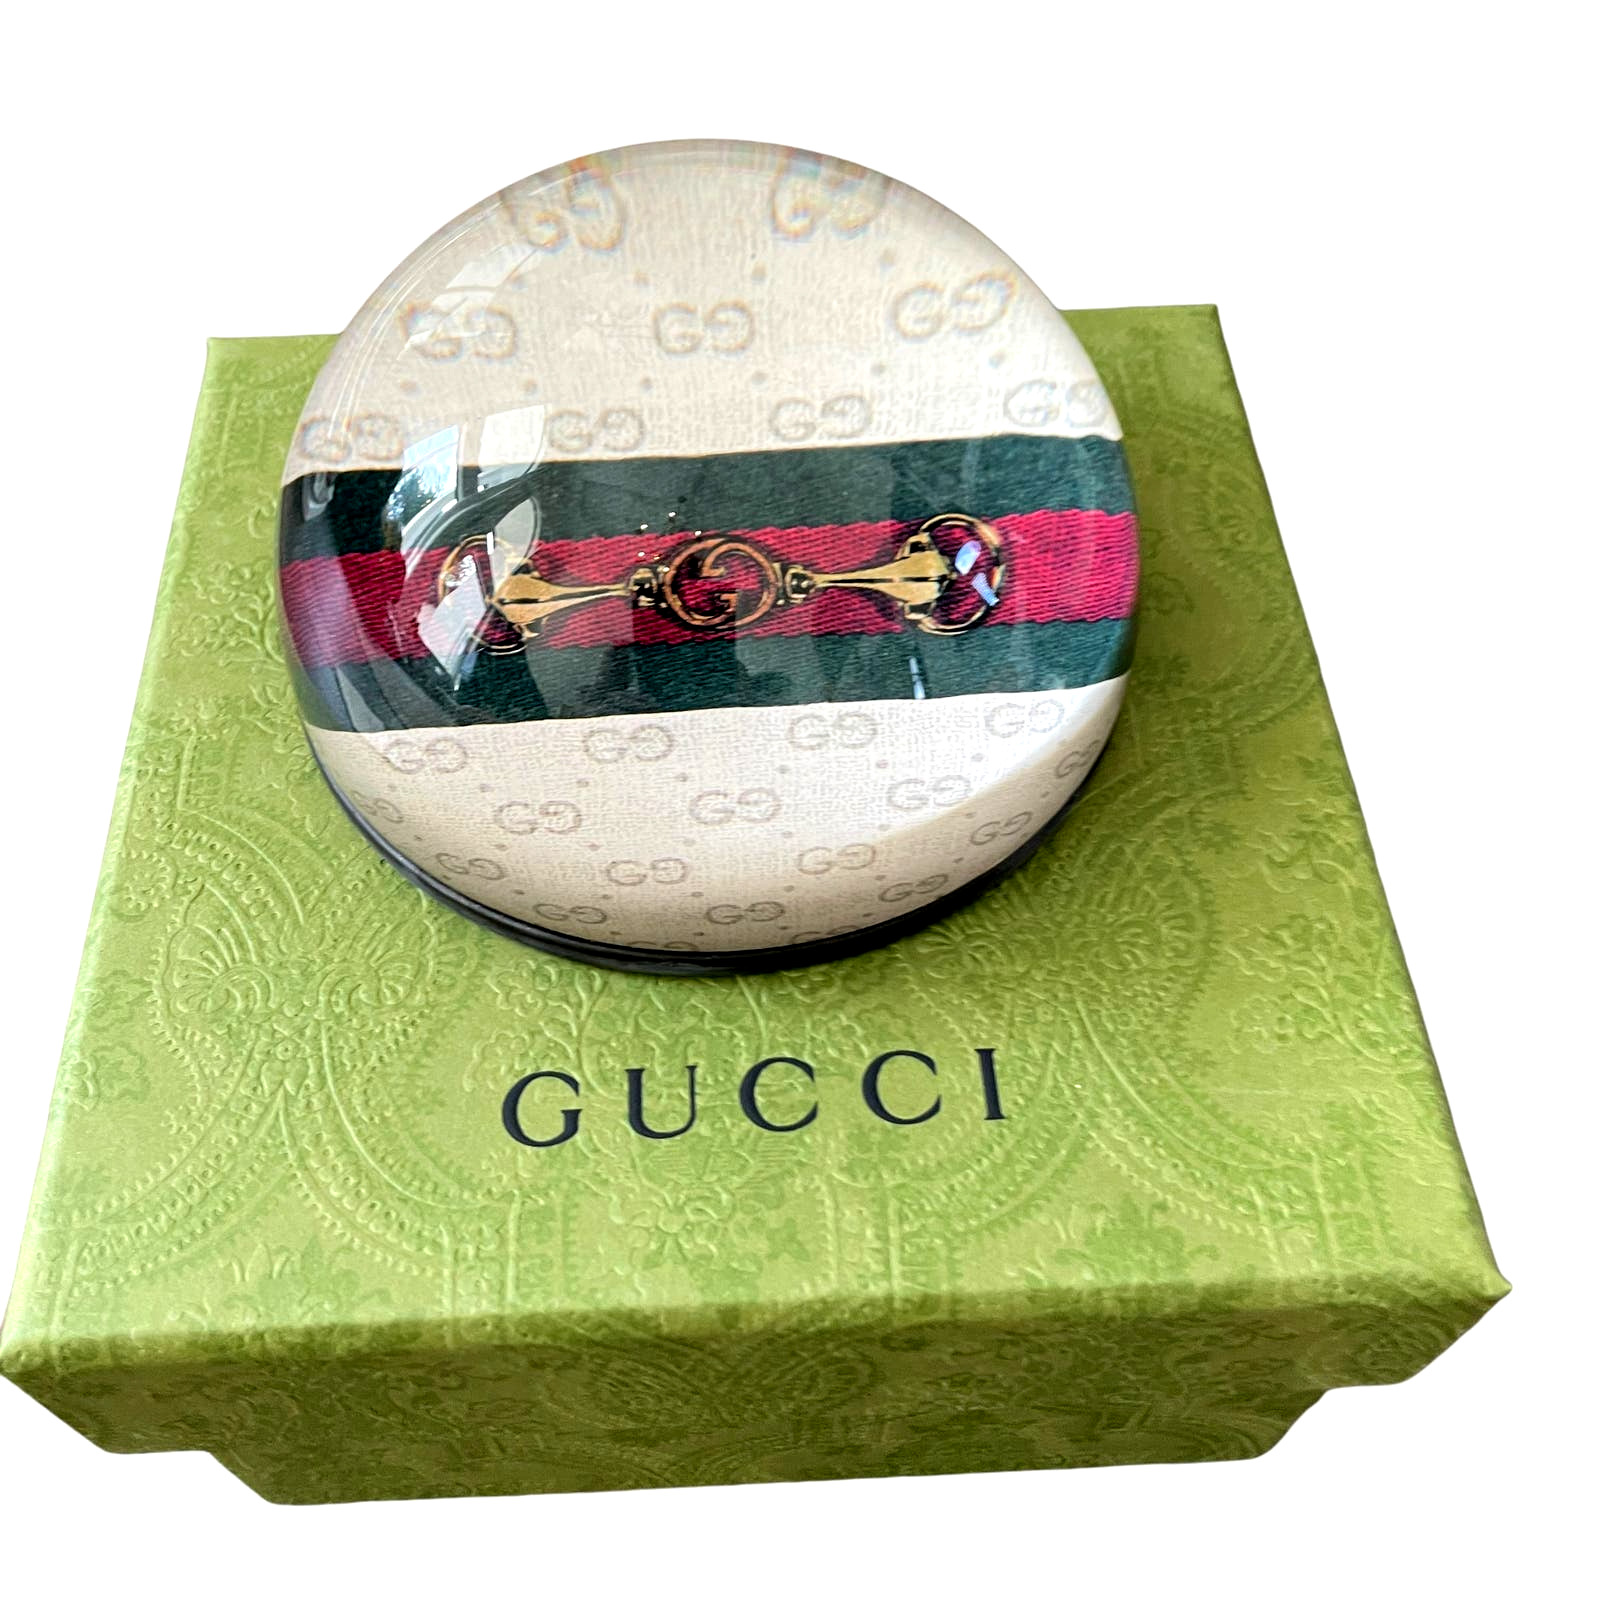 New Authentic GUCCI Logo Paperweight with Web & Horse Bit In Box